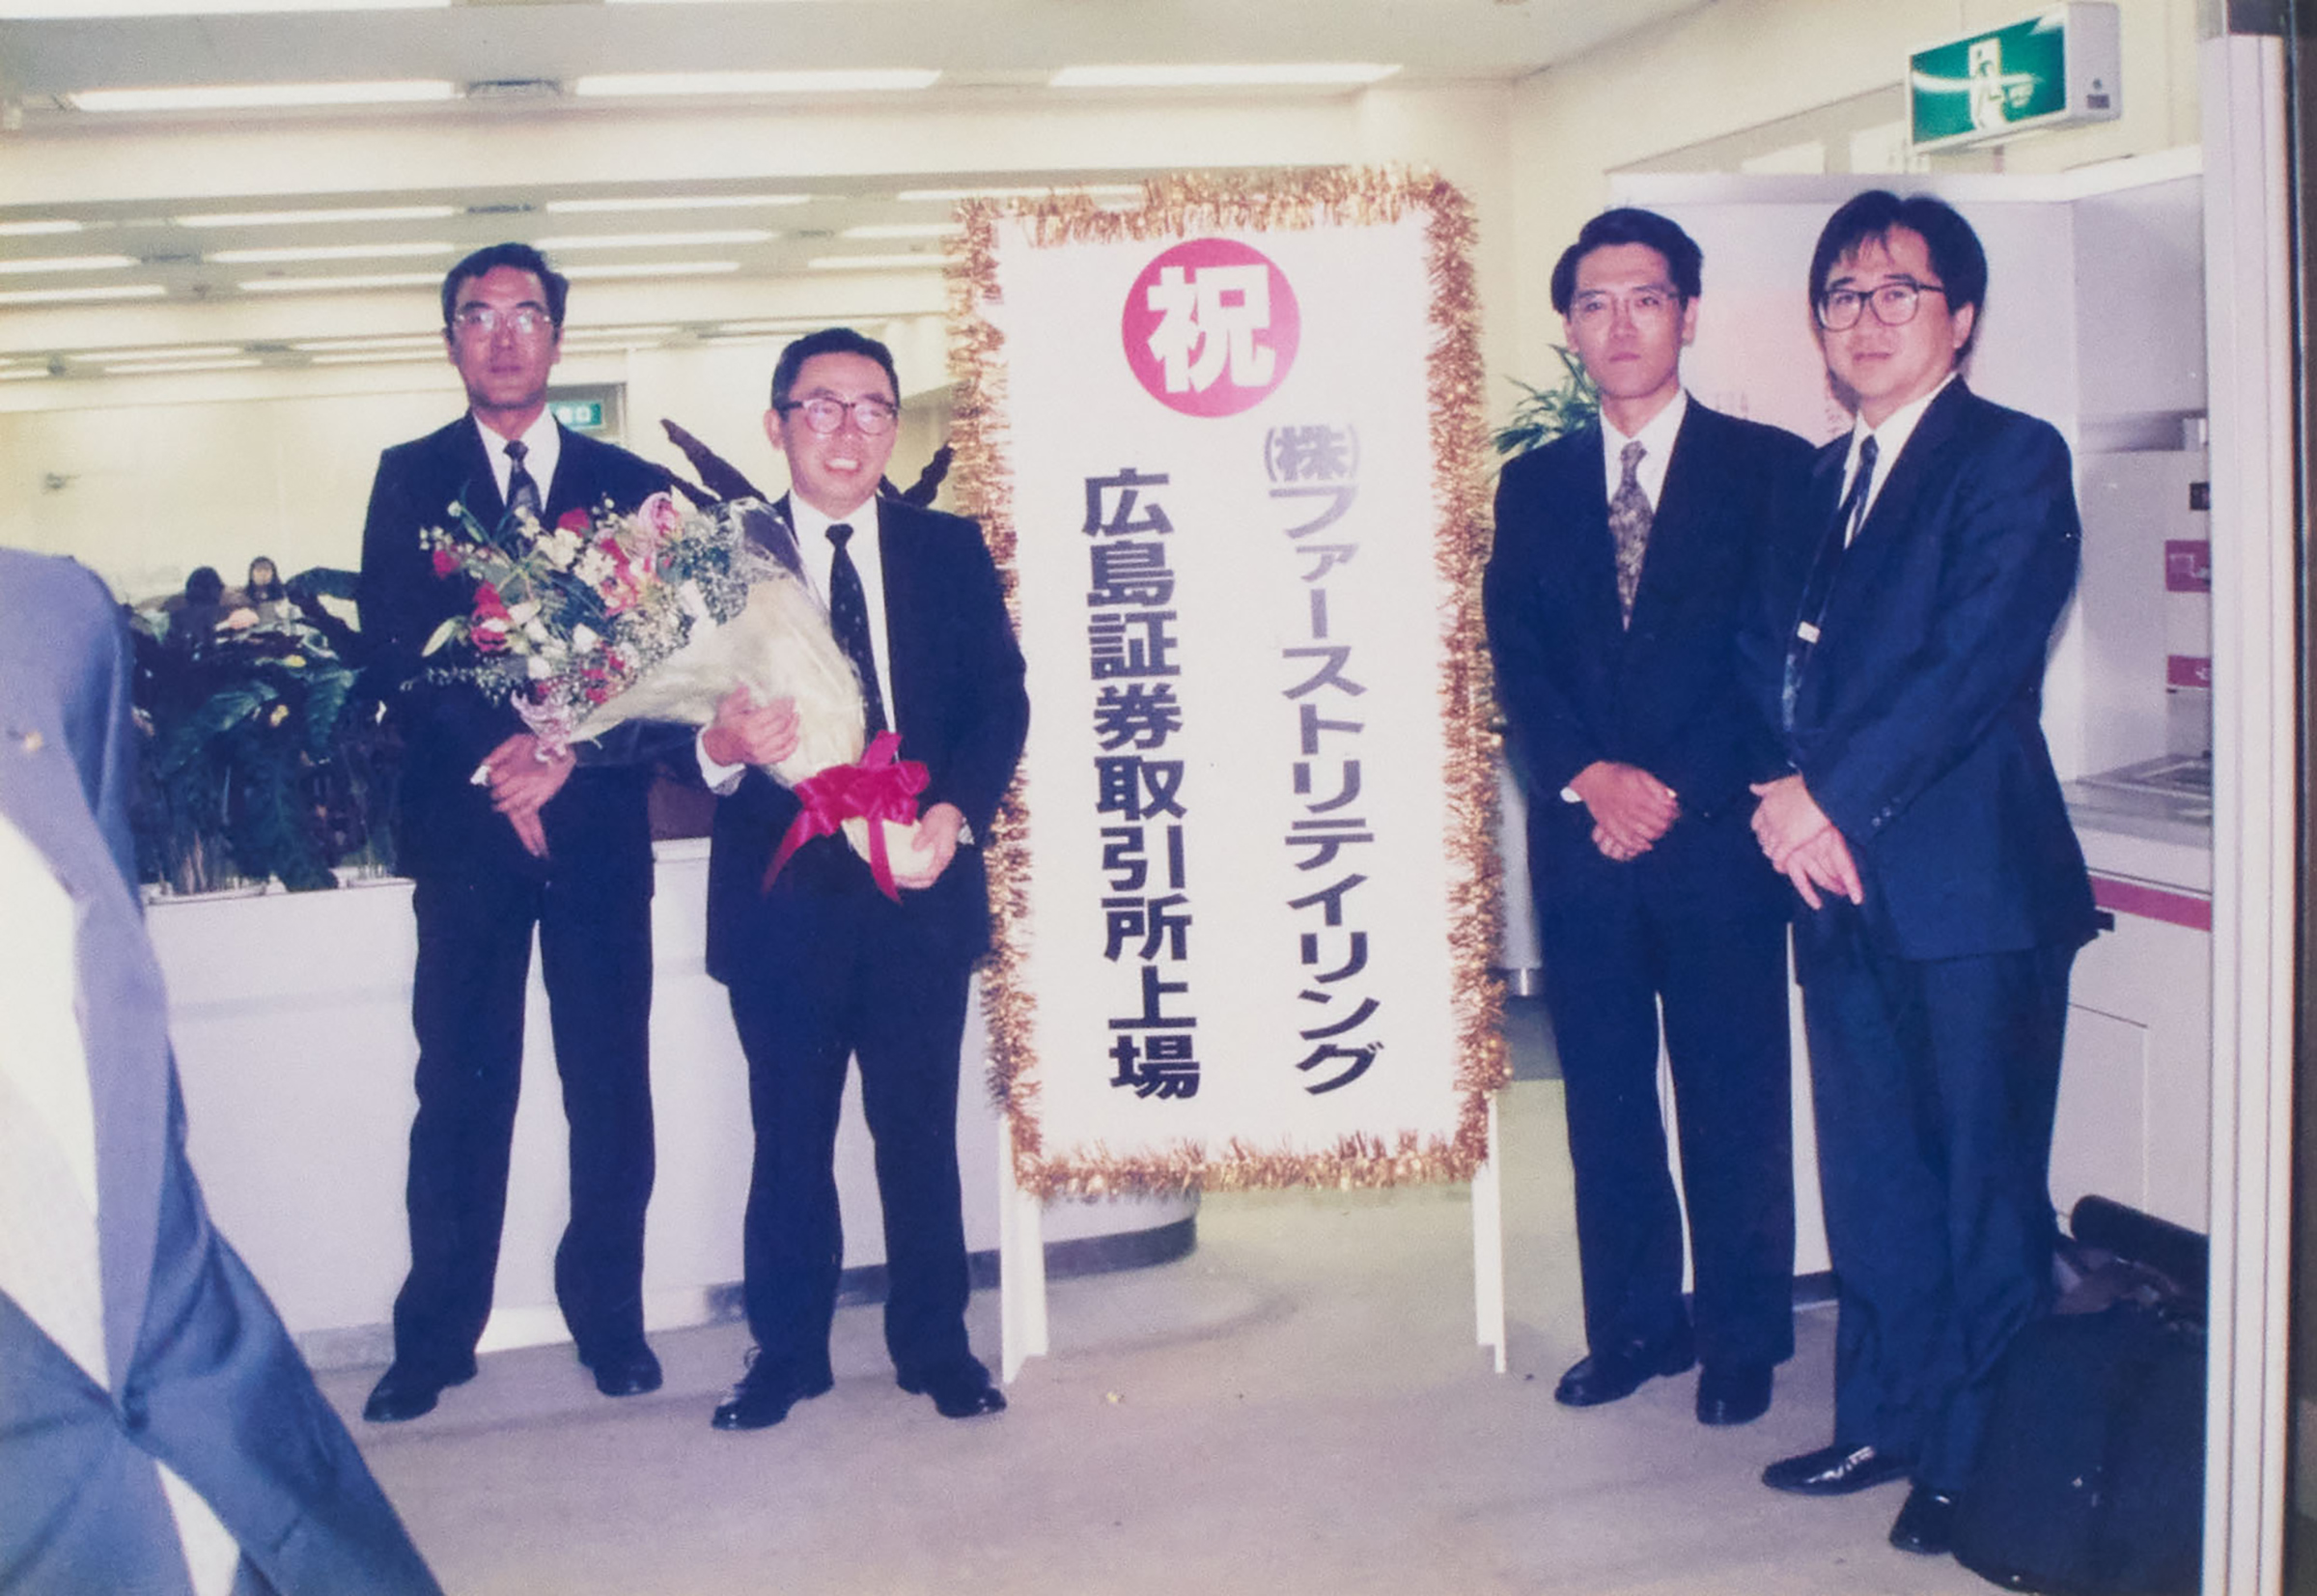 Yanai, second from left, at the initial public offering of Fast Retailing in 1994. The opening price fixed at 14,900 yen. (Courtesy Uniqlo)